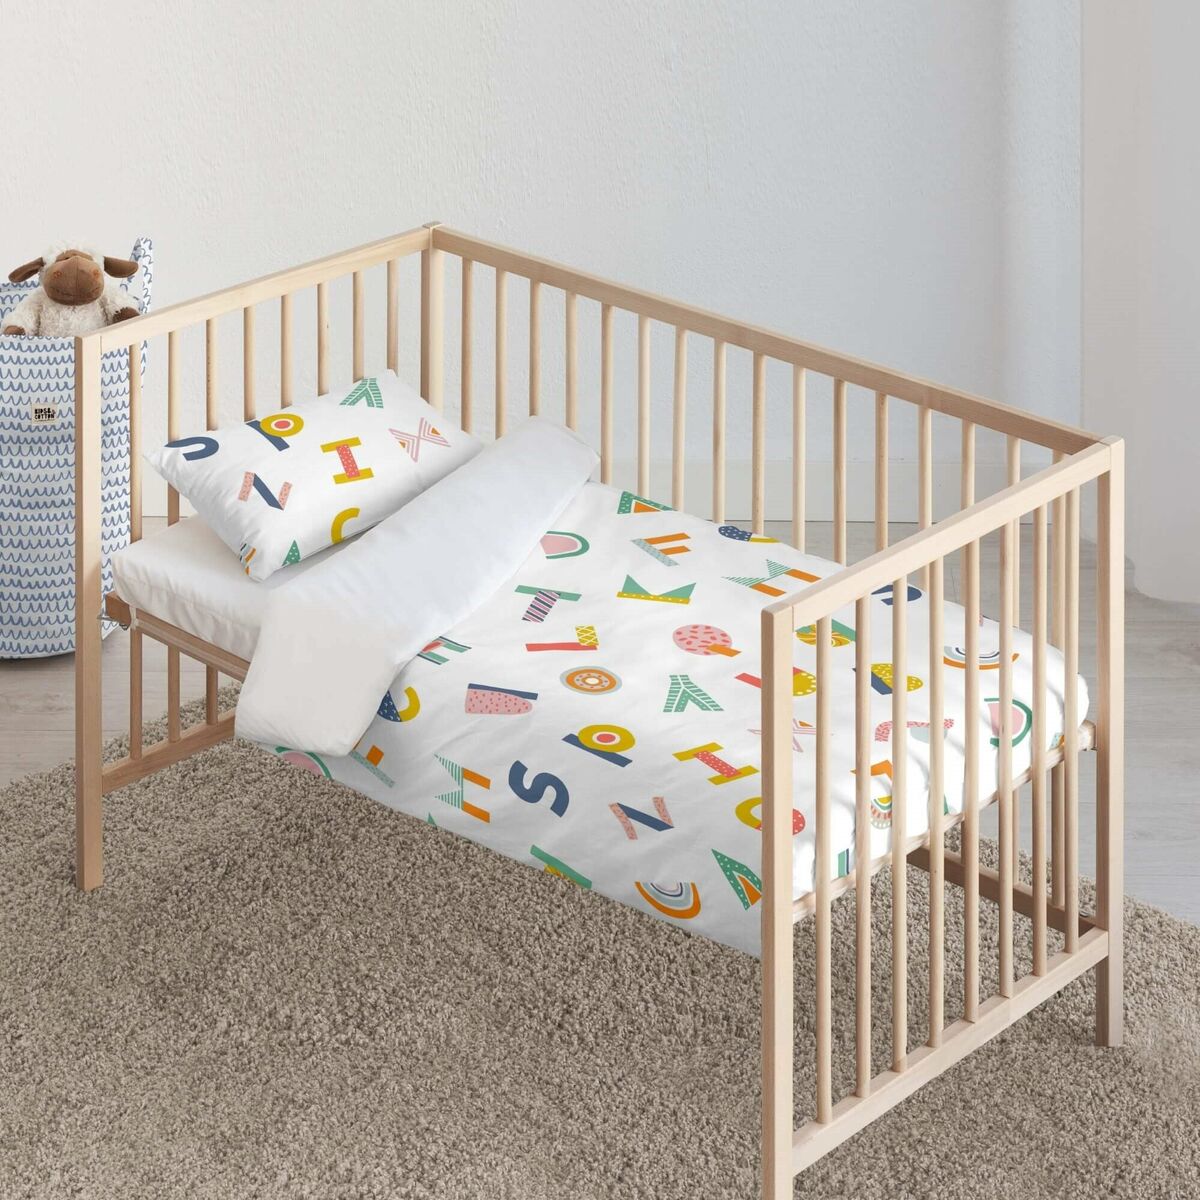 Cot Quilt Cover Kids&Cotton Urko Small 100 x 120 cm